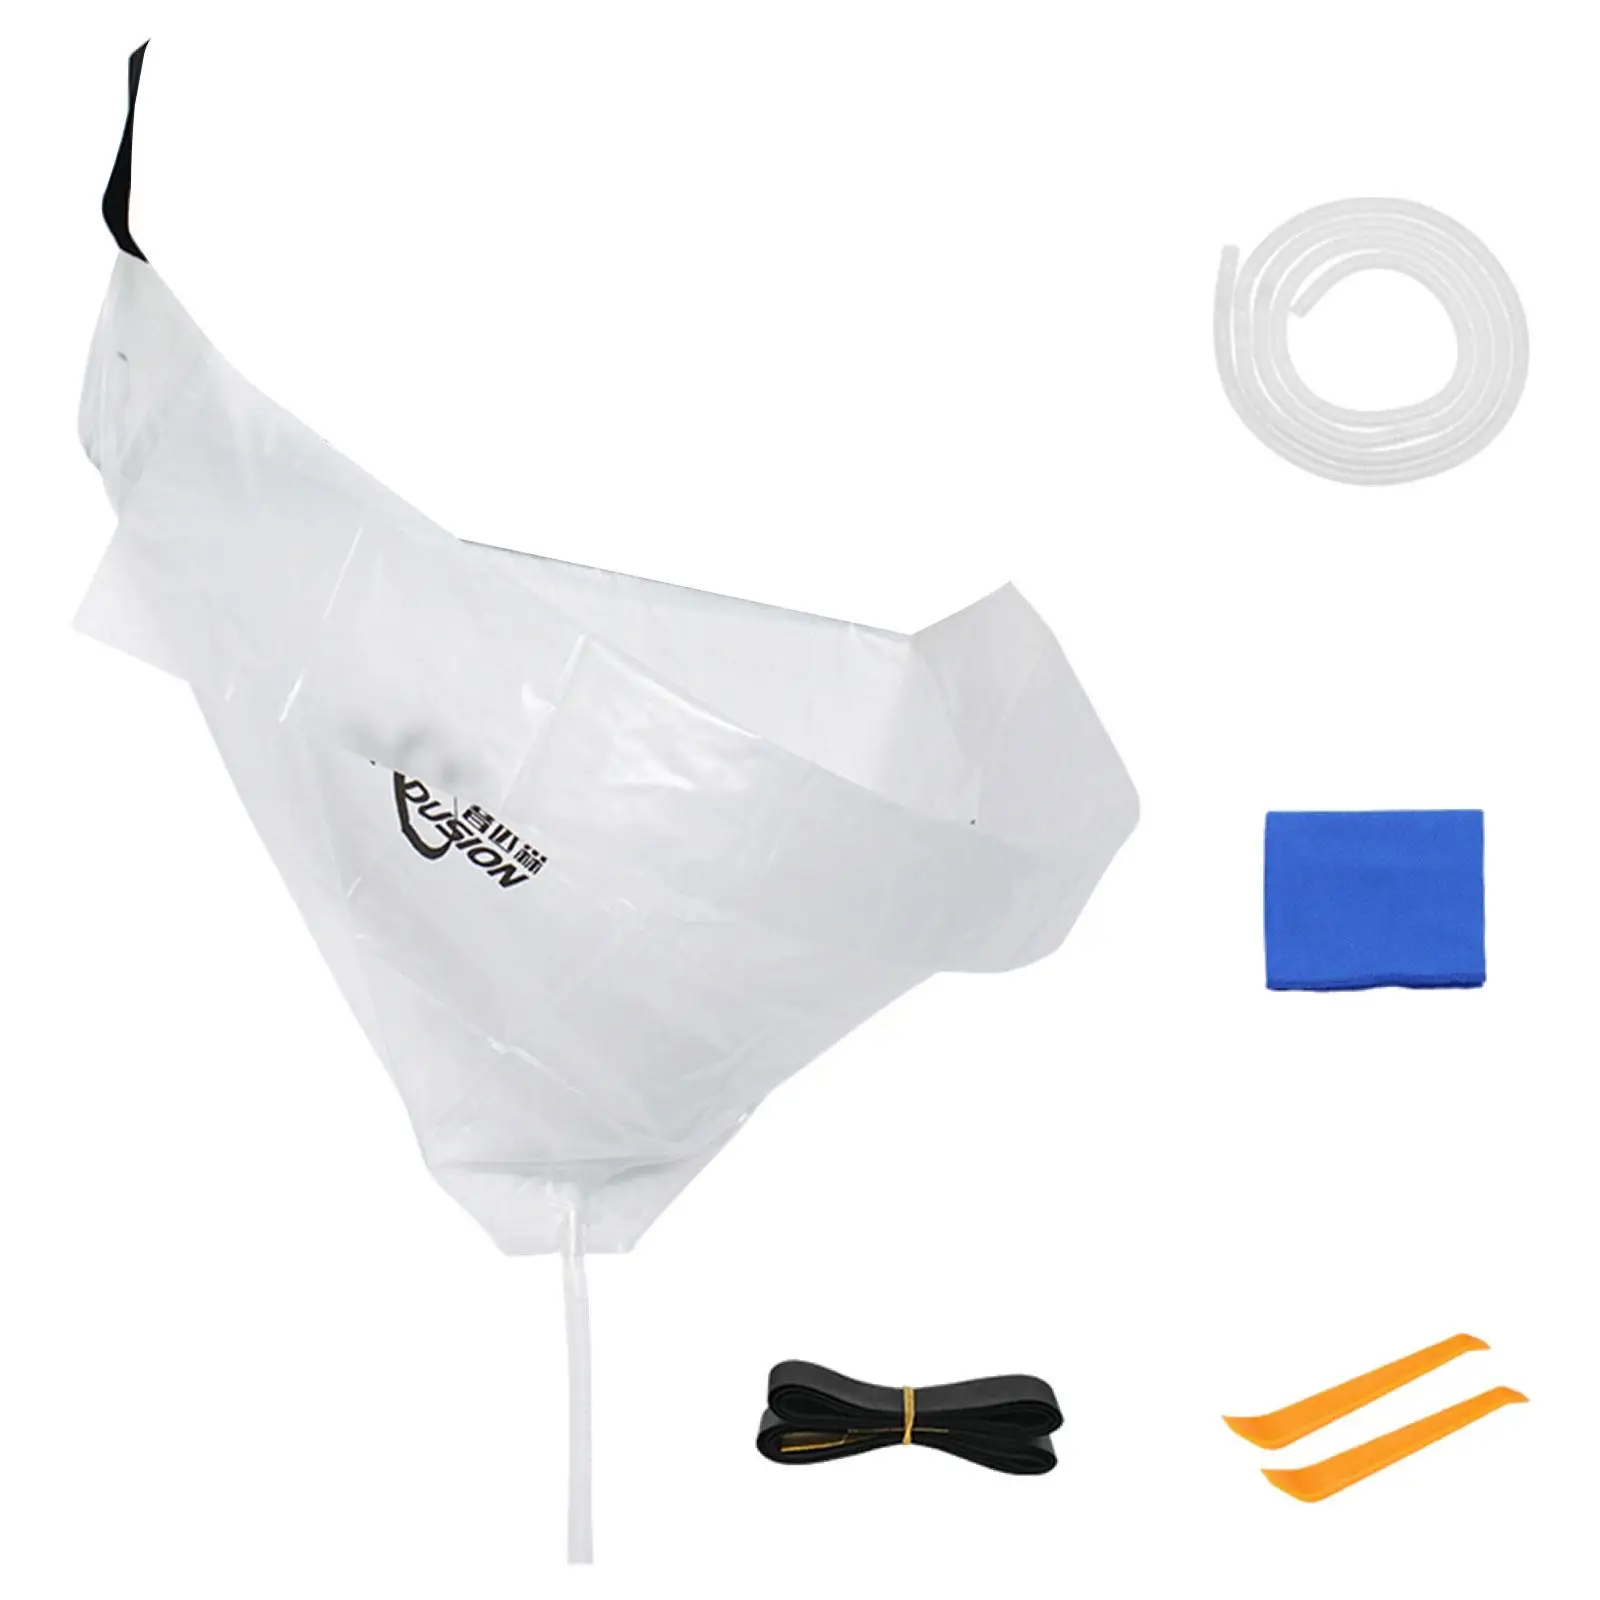 Air Conditioning Cleaning Cover Drain Outlet Dust Washing clean bag Conditioning Service Bag for Household Office Home